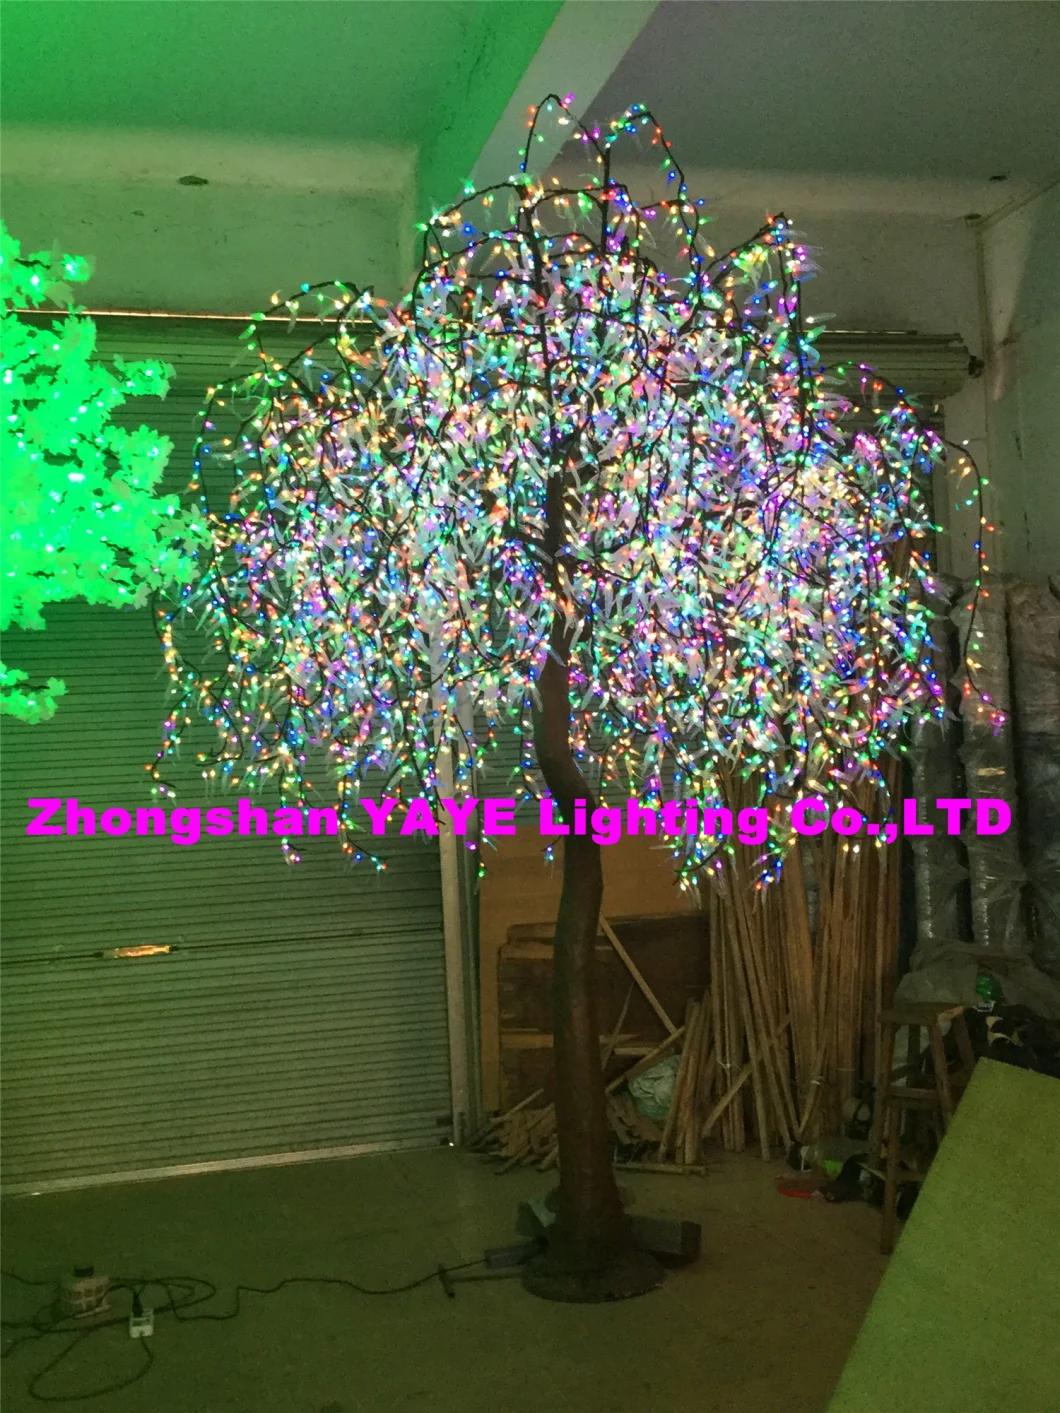 Yaye 2021 Hot Sell 2.5m Diameter /3m Height RGB Blue Color LED Willow Tree Light with CE/RoHS